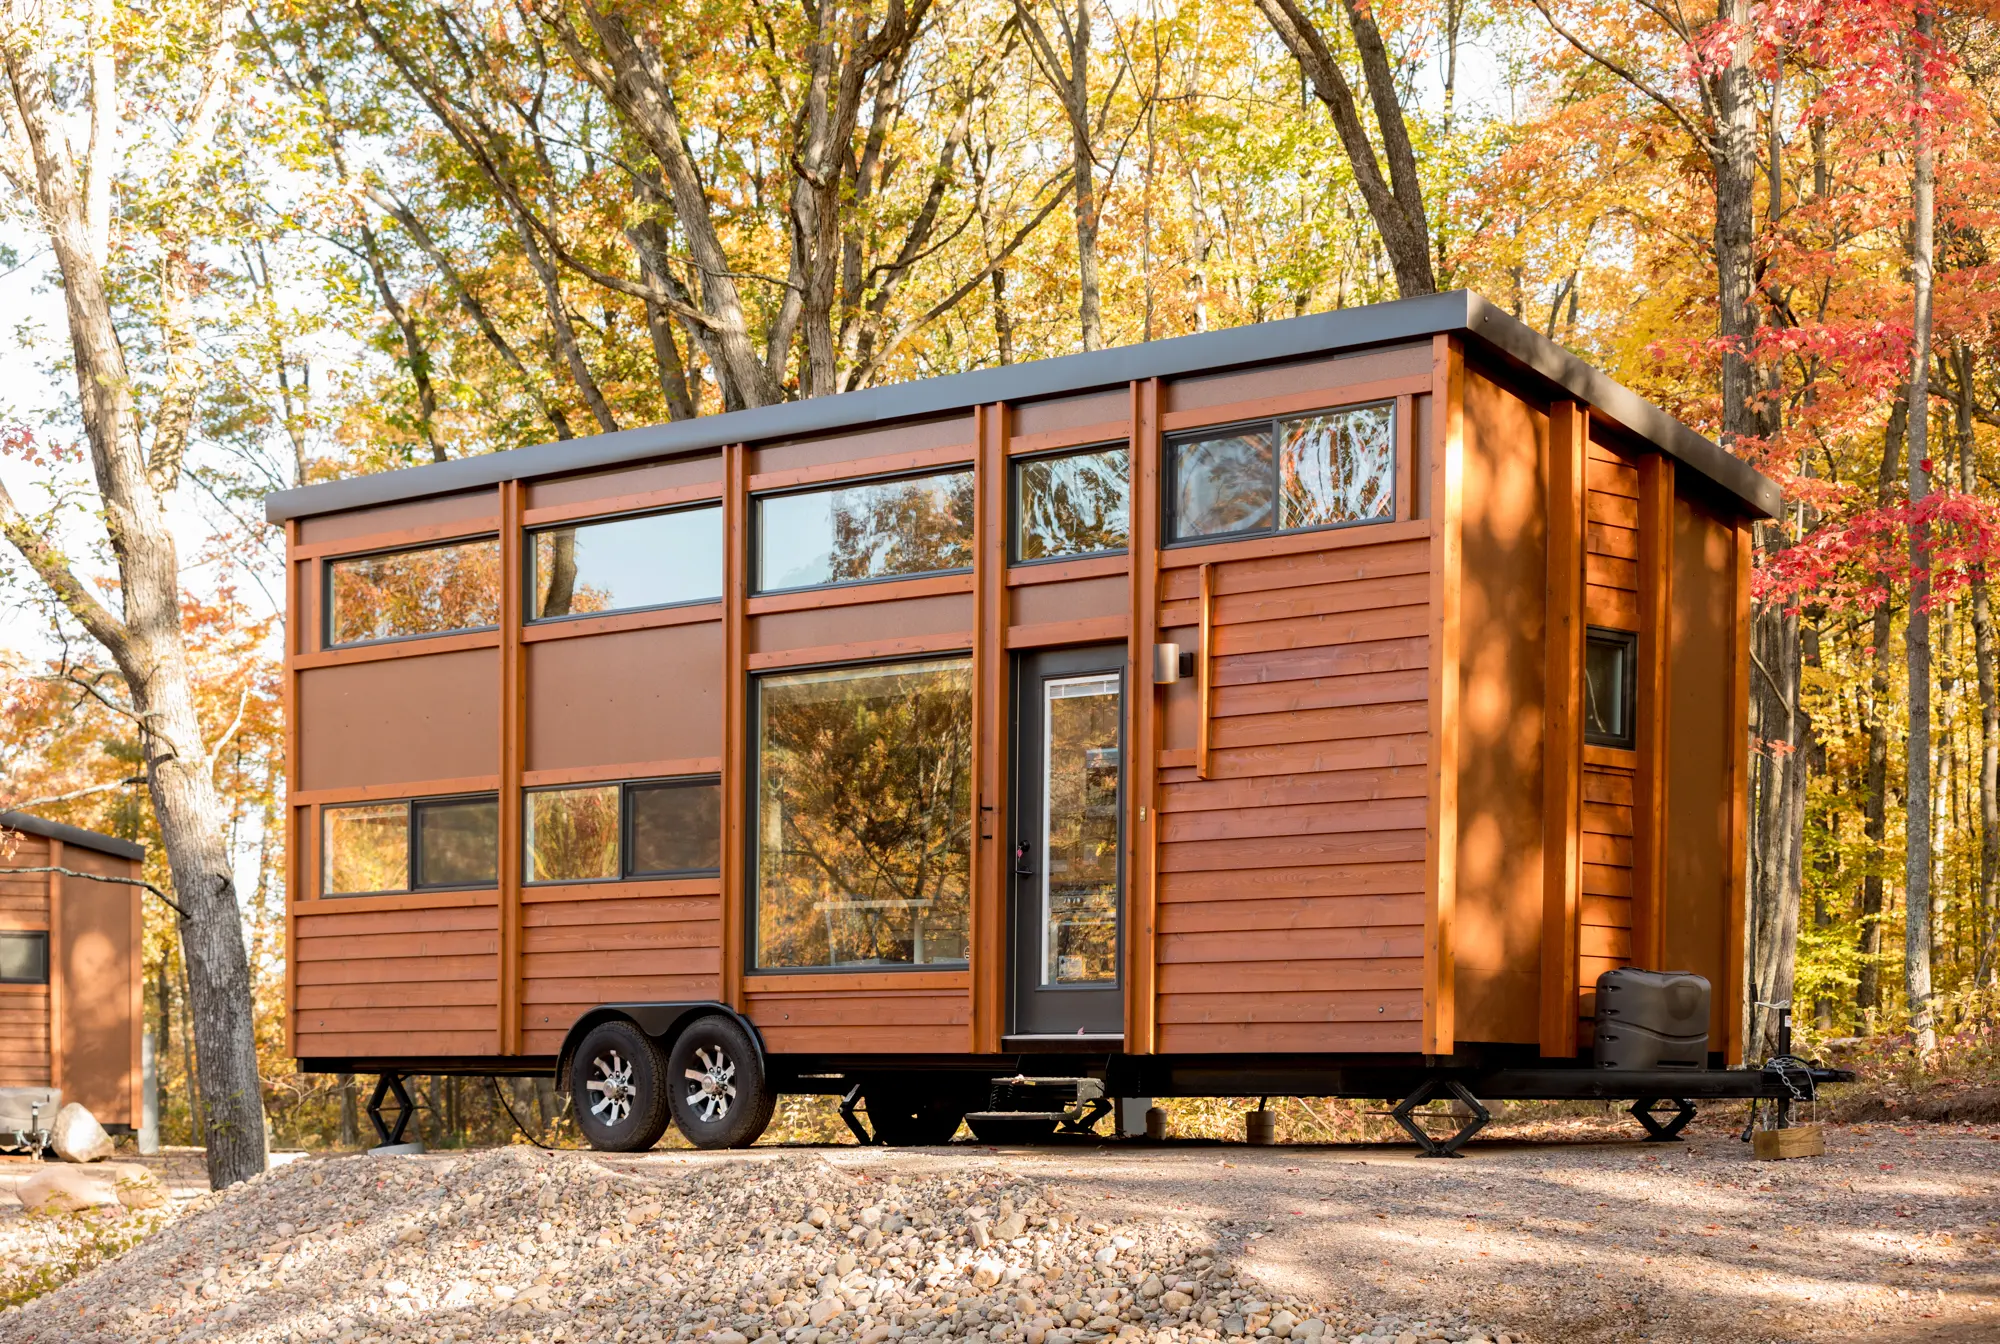 Exterior view of tiny home on wheels; wood siding in woods setting; two-level